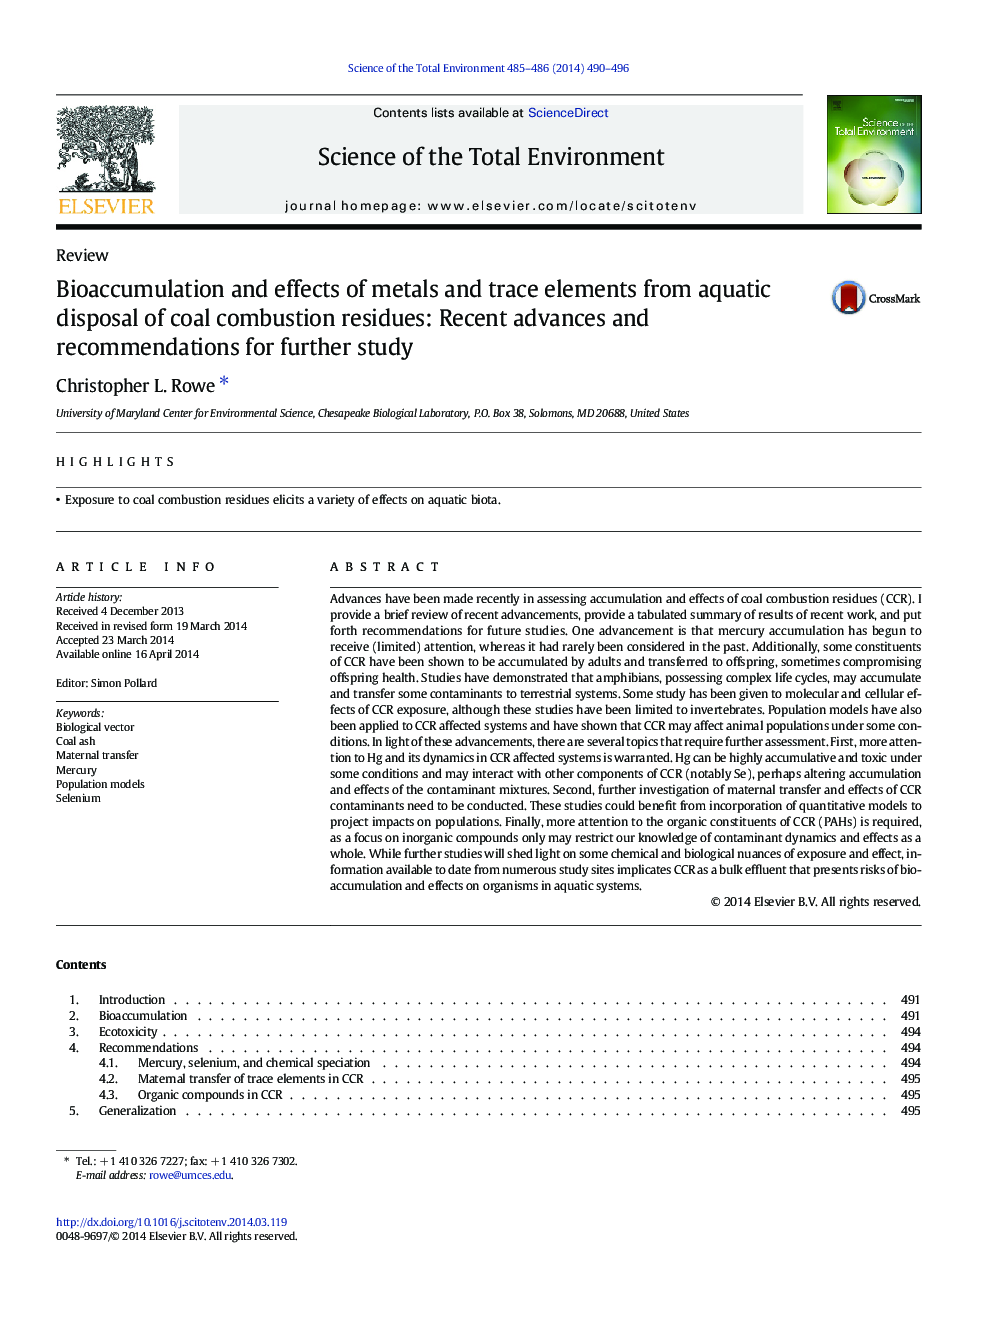 Bioaccumulation and effects of metals and trace elements from aquatic disposal of coal combustion residues: Recent advances and recommendations for further study